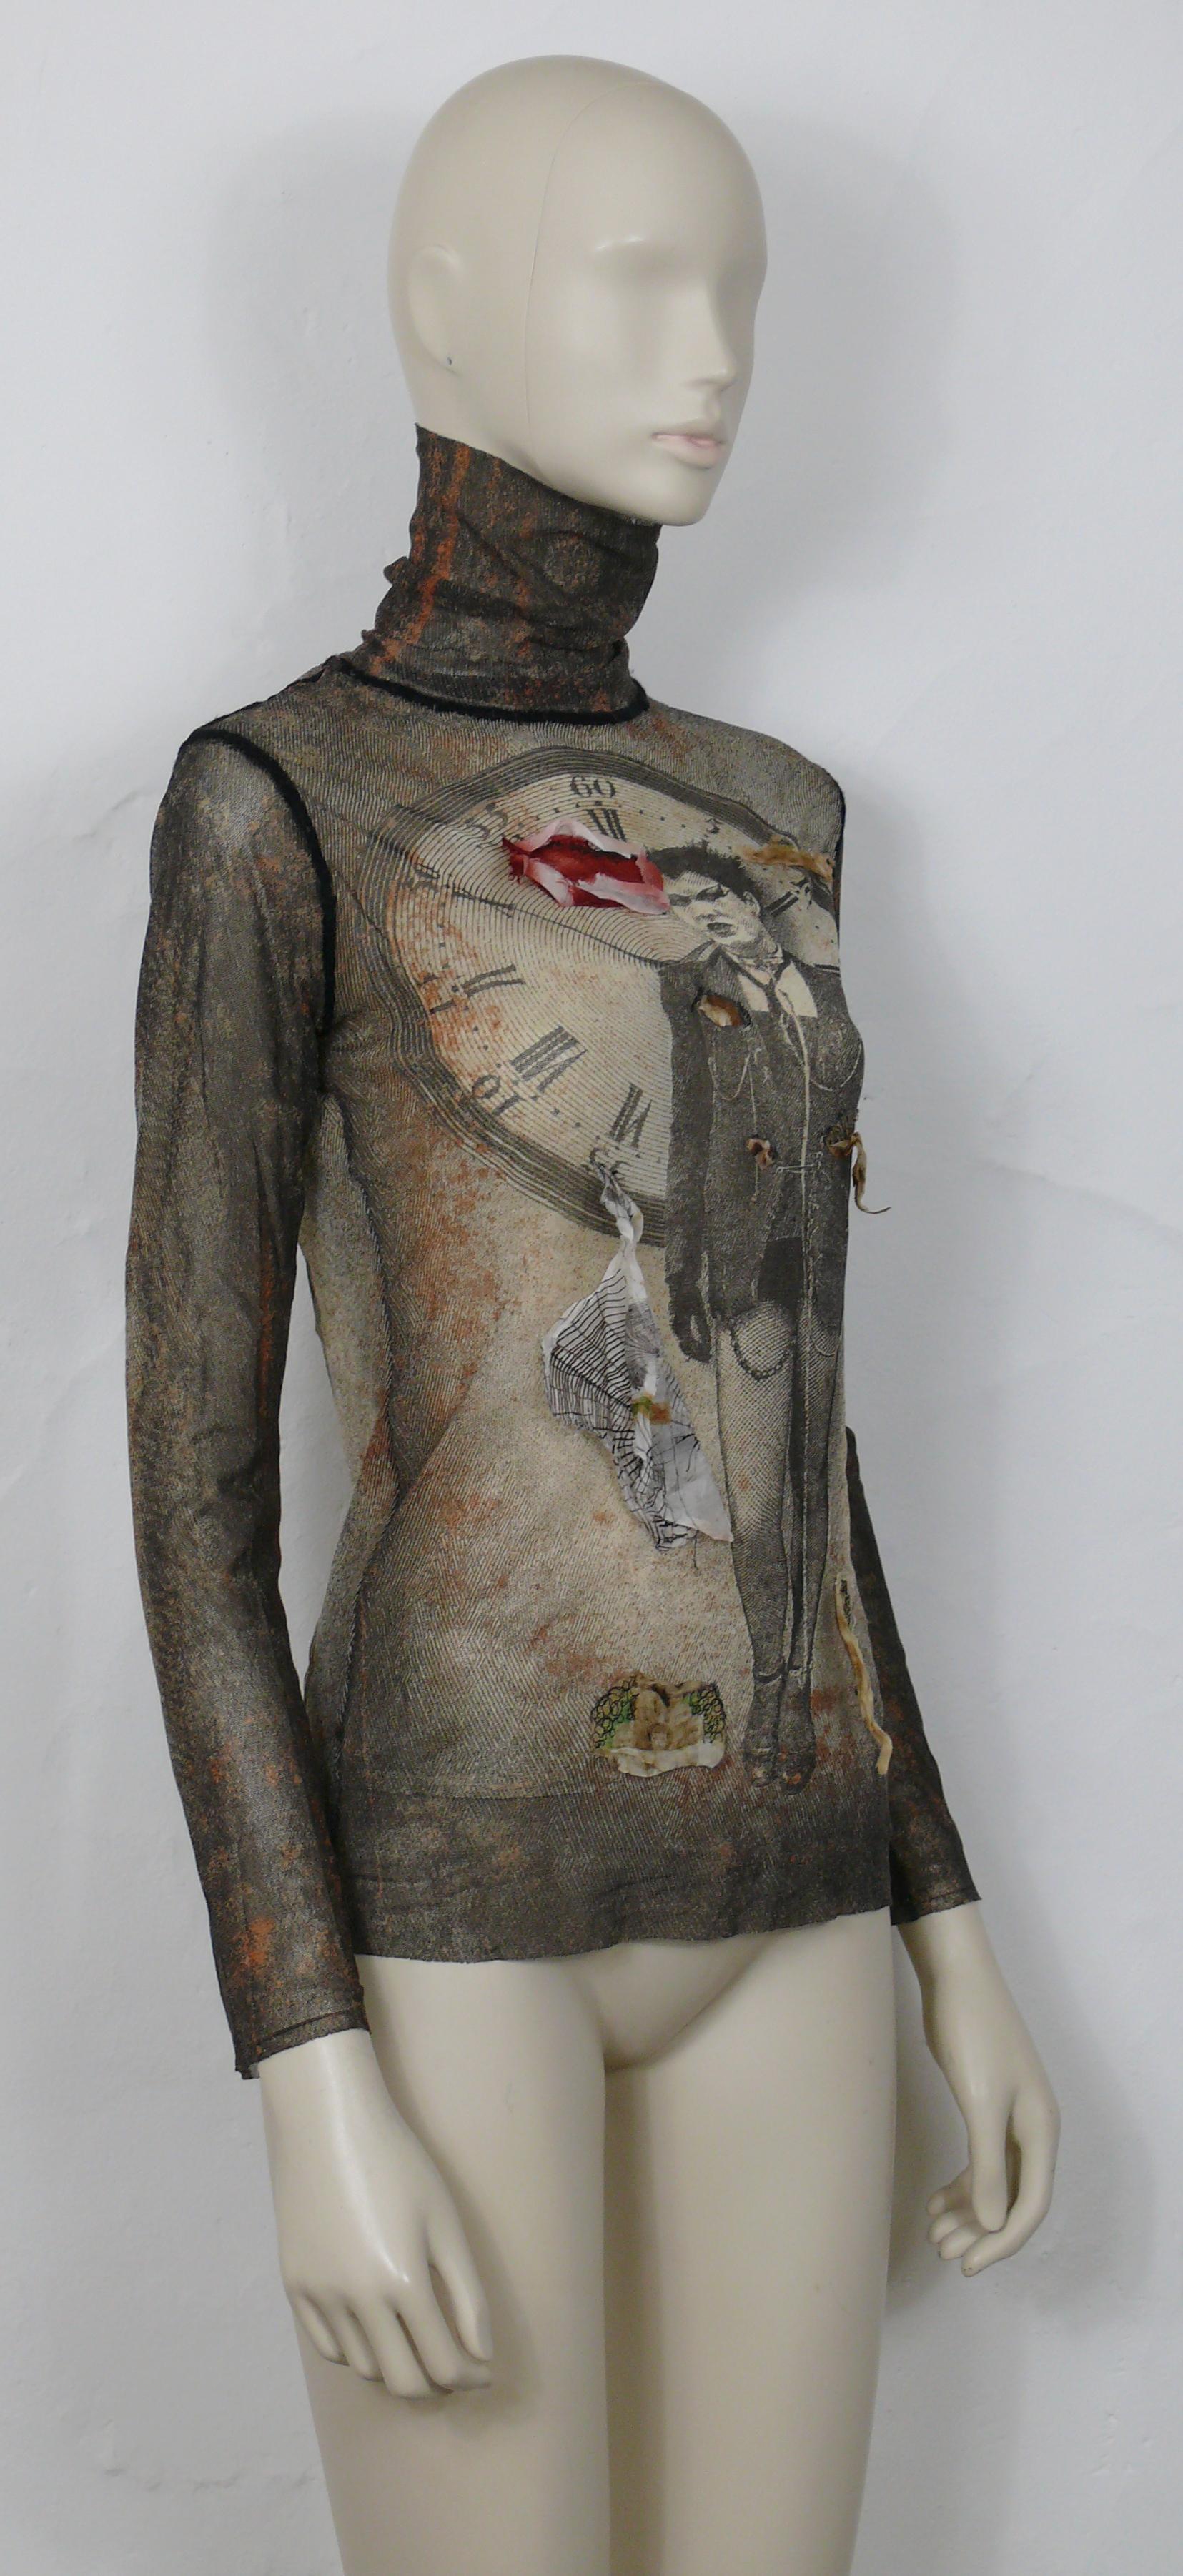 JEAN PAUL GAULTIER vintage sheer FUZZI mesh turtleneck top featuring a punk lady and clock print with eye, doll heads and cobwebs appliques.

Label reads JEAN PAUL GAULTIER MAILLE FEMME.
Made in Italy.

Size label reads : L.
Please refer to